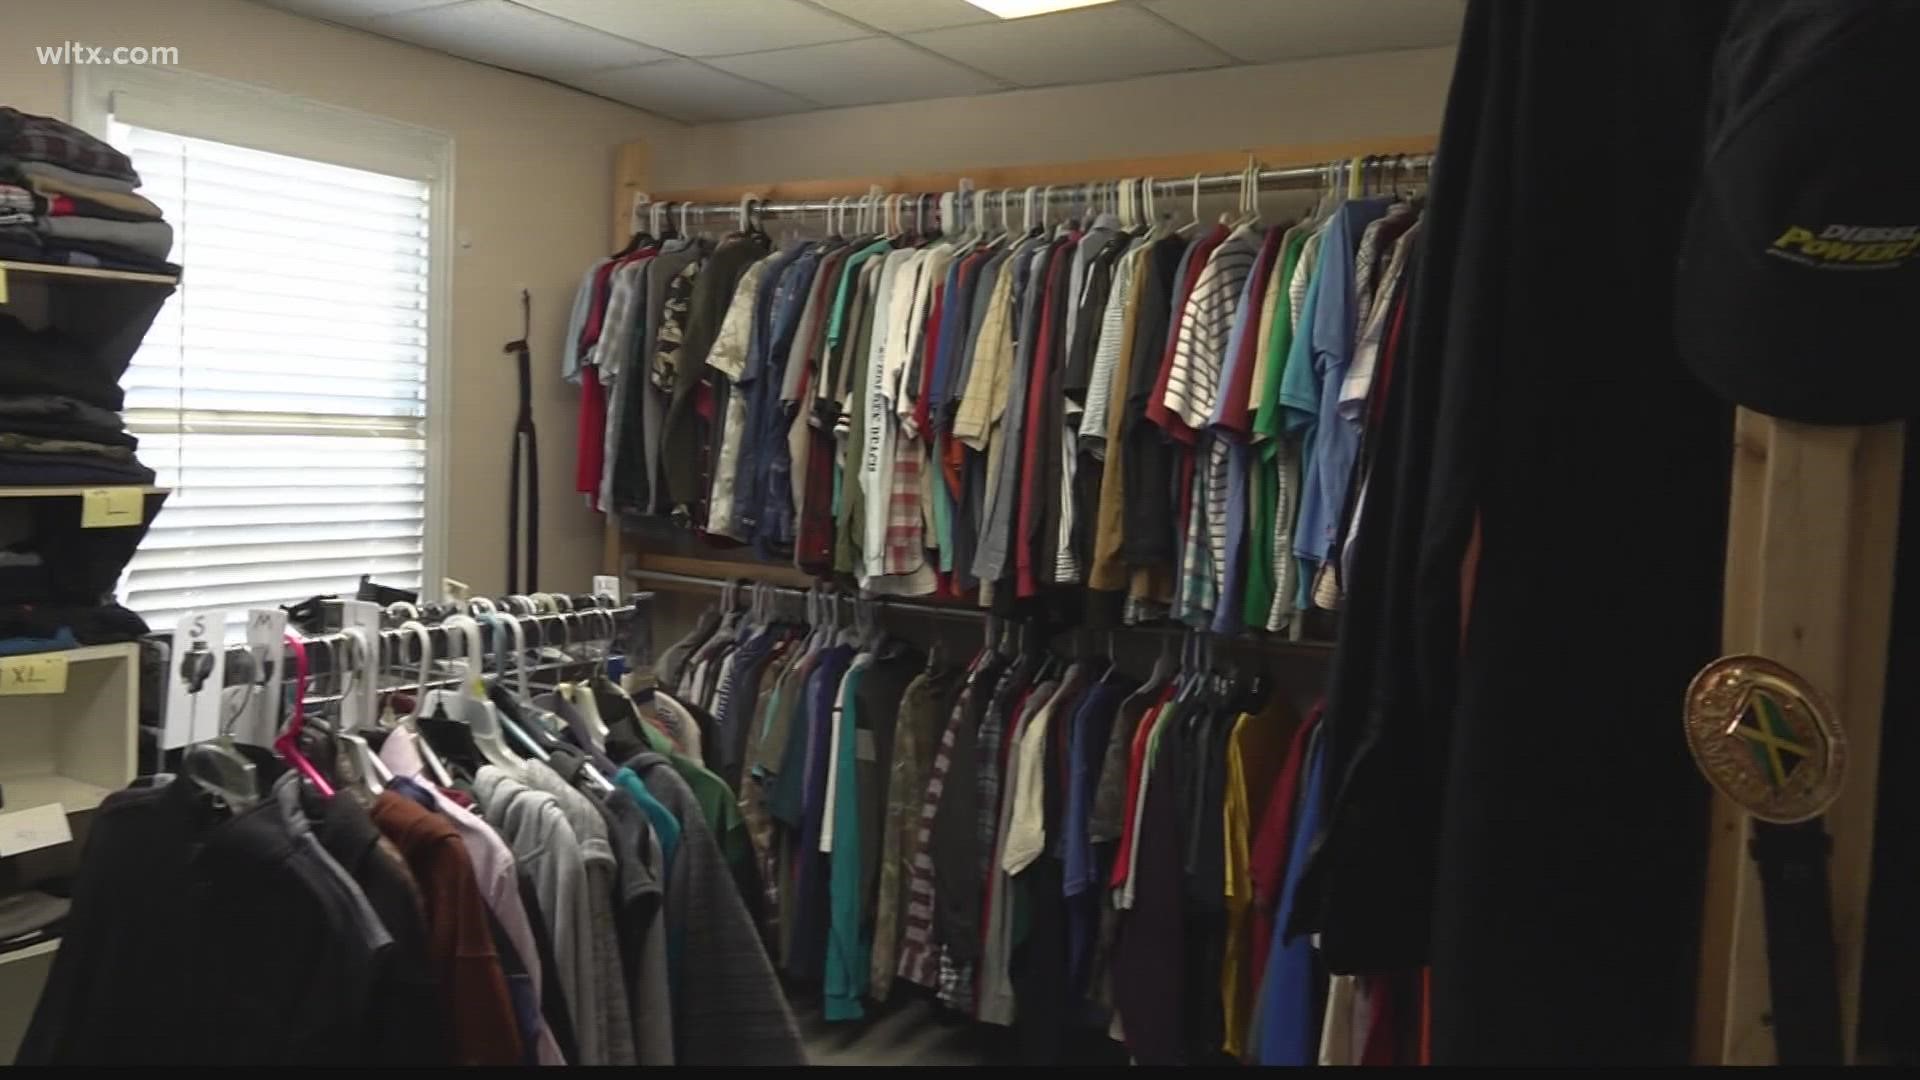 Tricia's Trunk, a community closet, collects donations from the community so people can come and 'shop' for whatever they need.